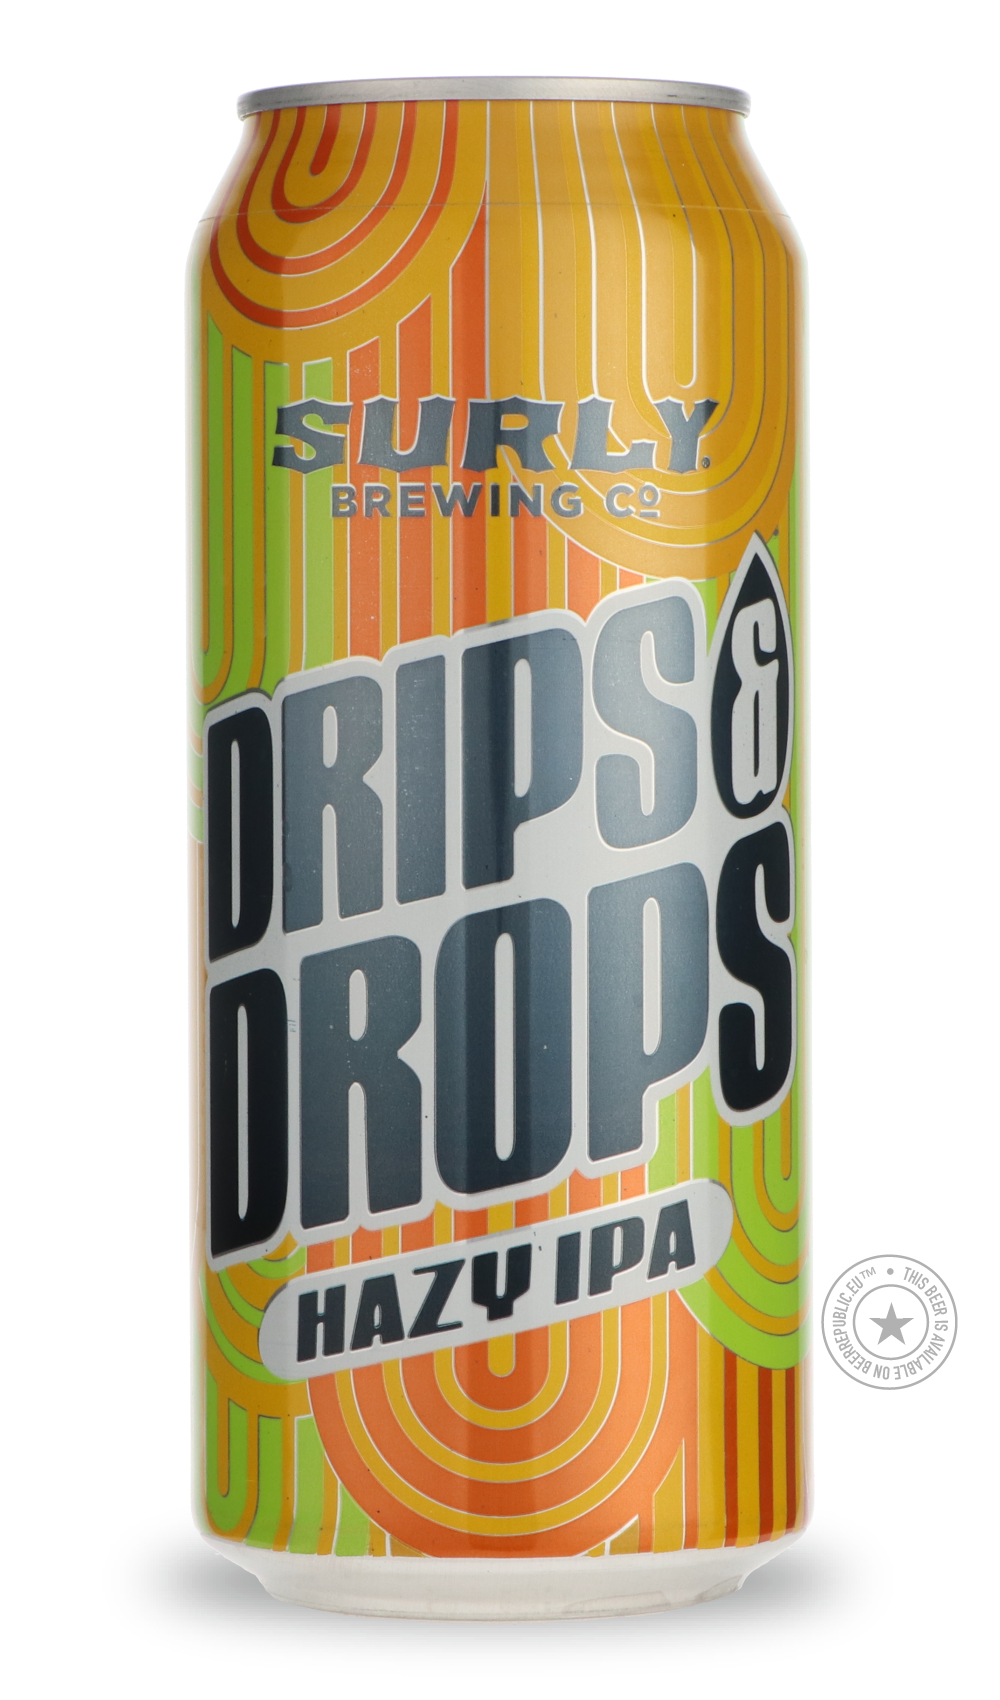 -Surly- Drips & Drops-IPA- Only @ Beer Republic - The best online beer store for American & Canadian craft beer - Buy beer online from the USA and Canada - Bier online kopen - Amerikaans bier kopen - Craft beer store - Craft beer kopen - Amerikanisch bier kaufen - Bier online kaufen - Acheter biere online - IPA - Stout - Porter - New England IPA - Hazy IPA - Imperial Stout - Barrel Aged - Barrel Aged Imperial Stout - Brown - Dark beer - Blond - Blonde - Pilsner - Lager - Wheat - Weizen - Amber - Barley Wine